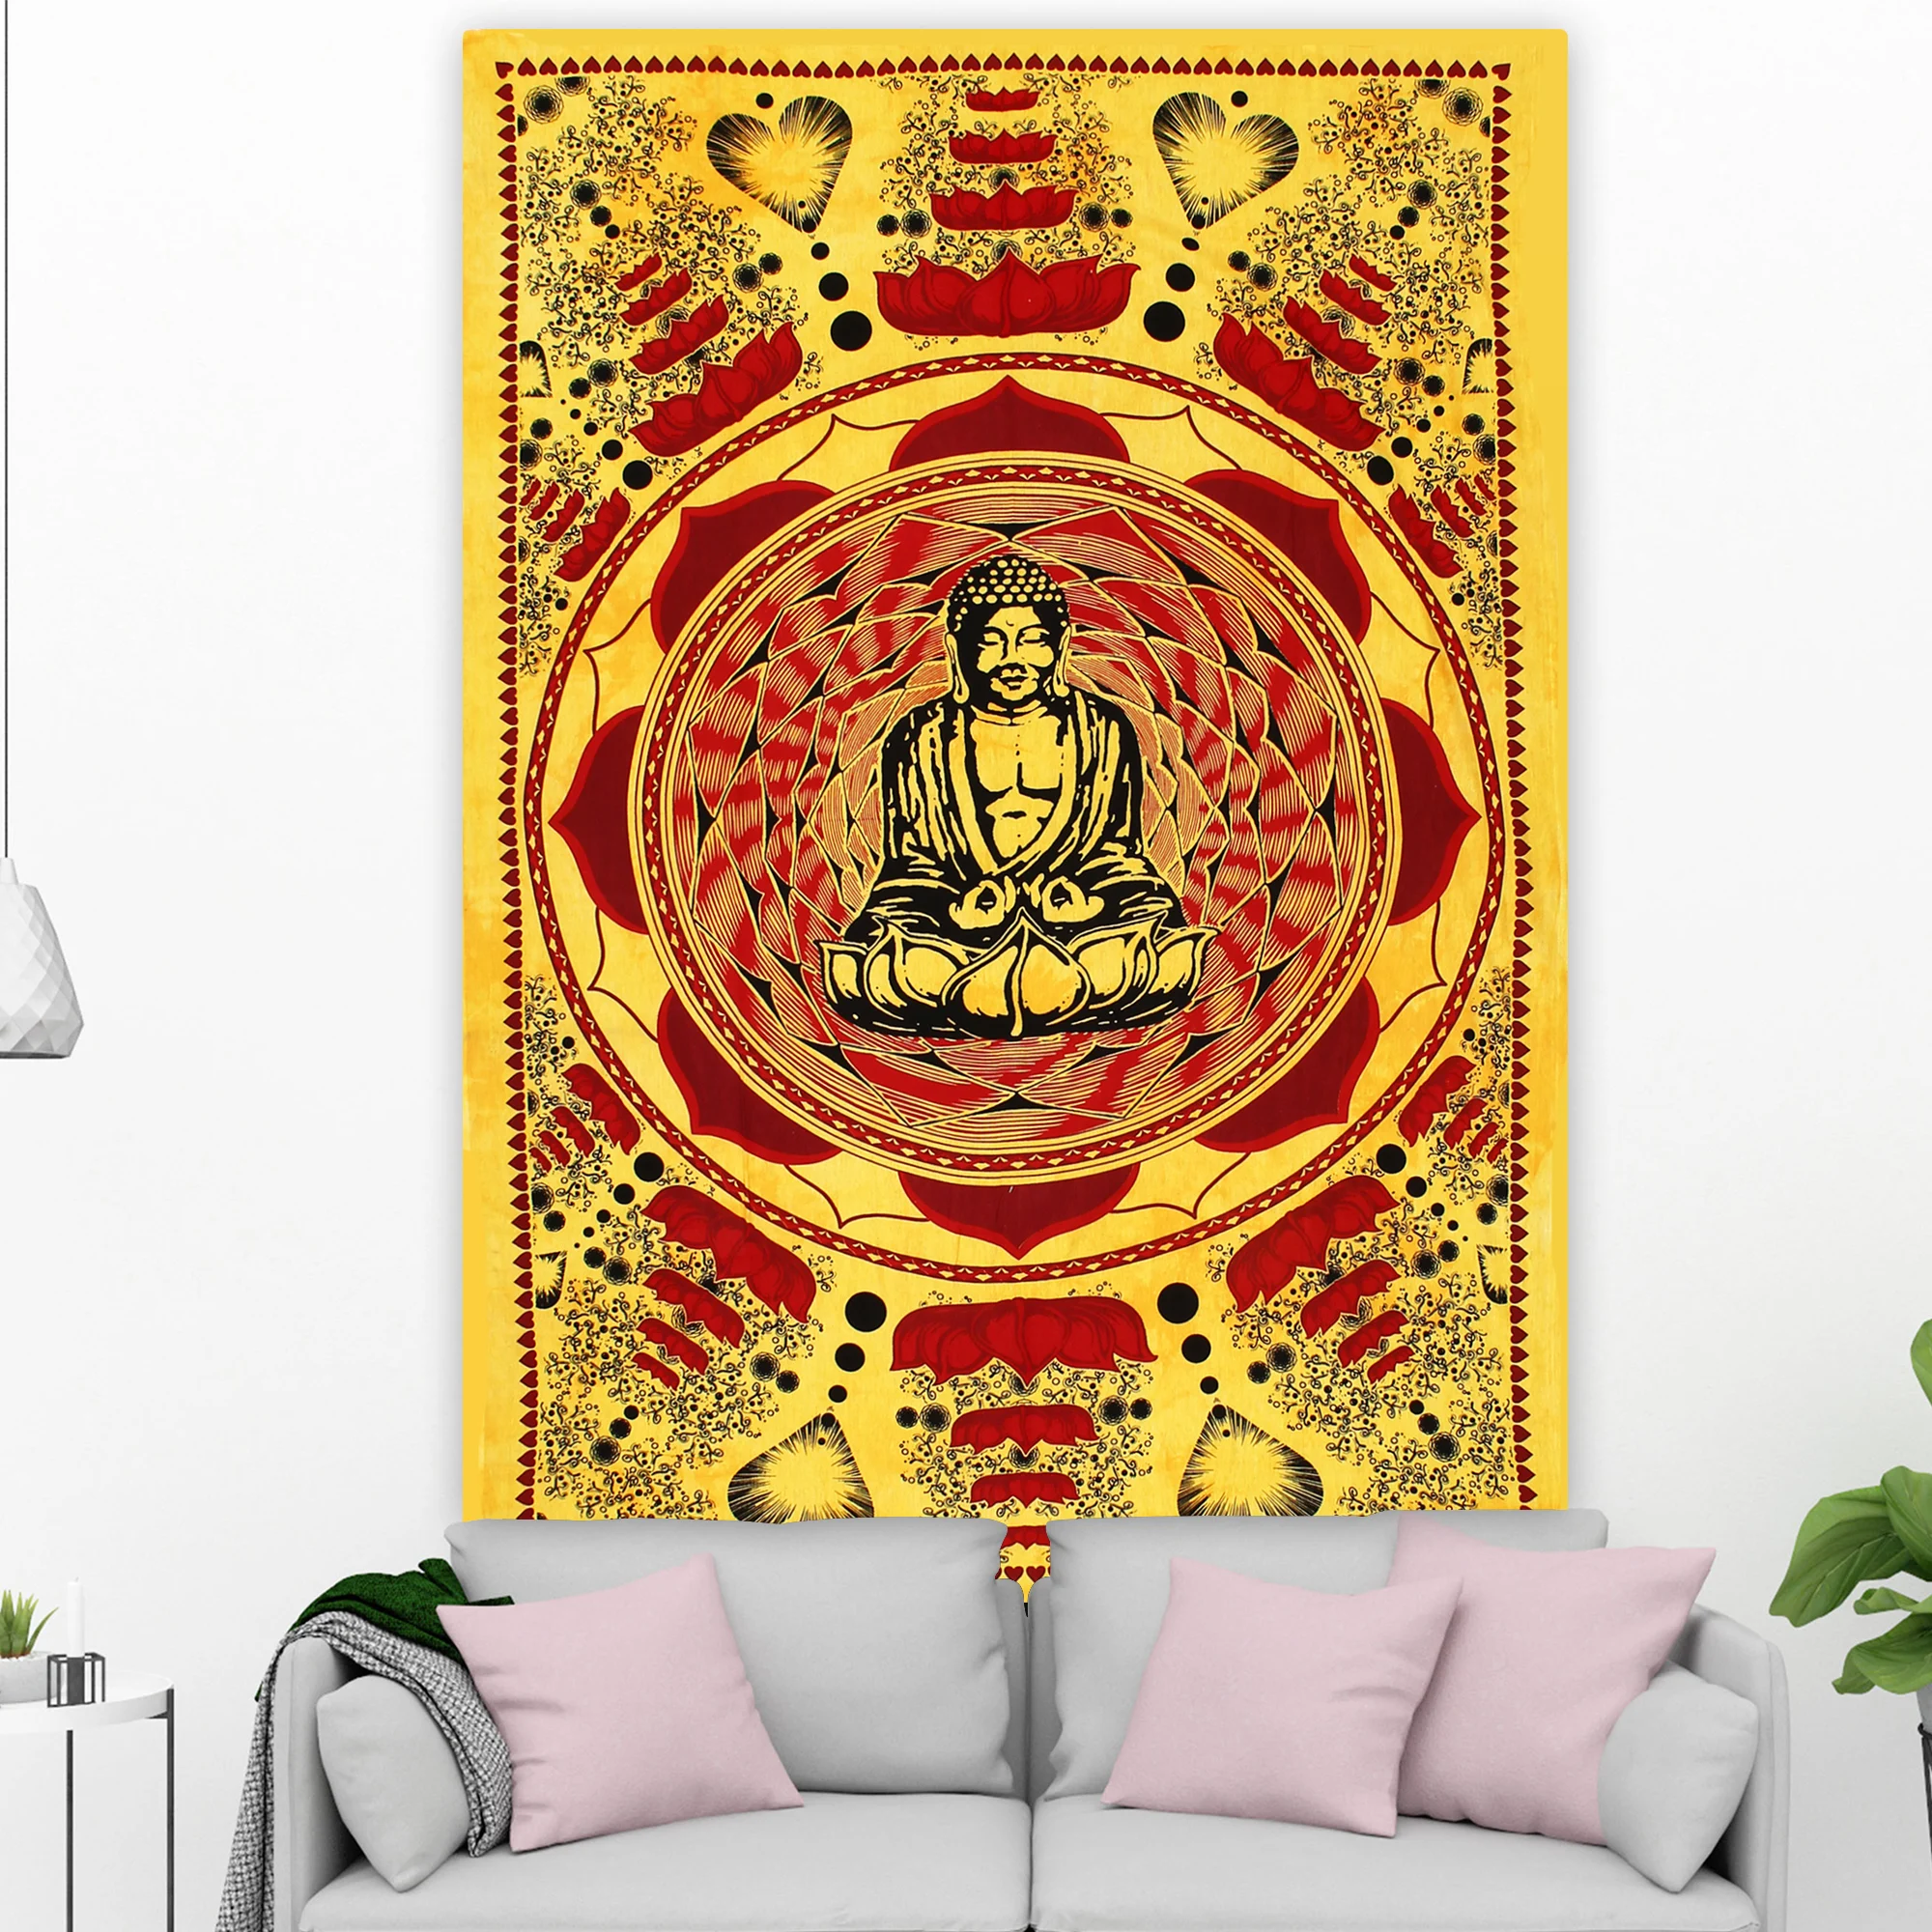 Twin Mandala Tapestry Wall Hanging Art Indian Cotton Tapestries Bedspread Hippie 